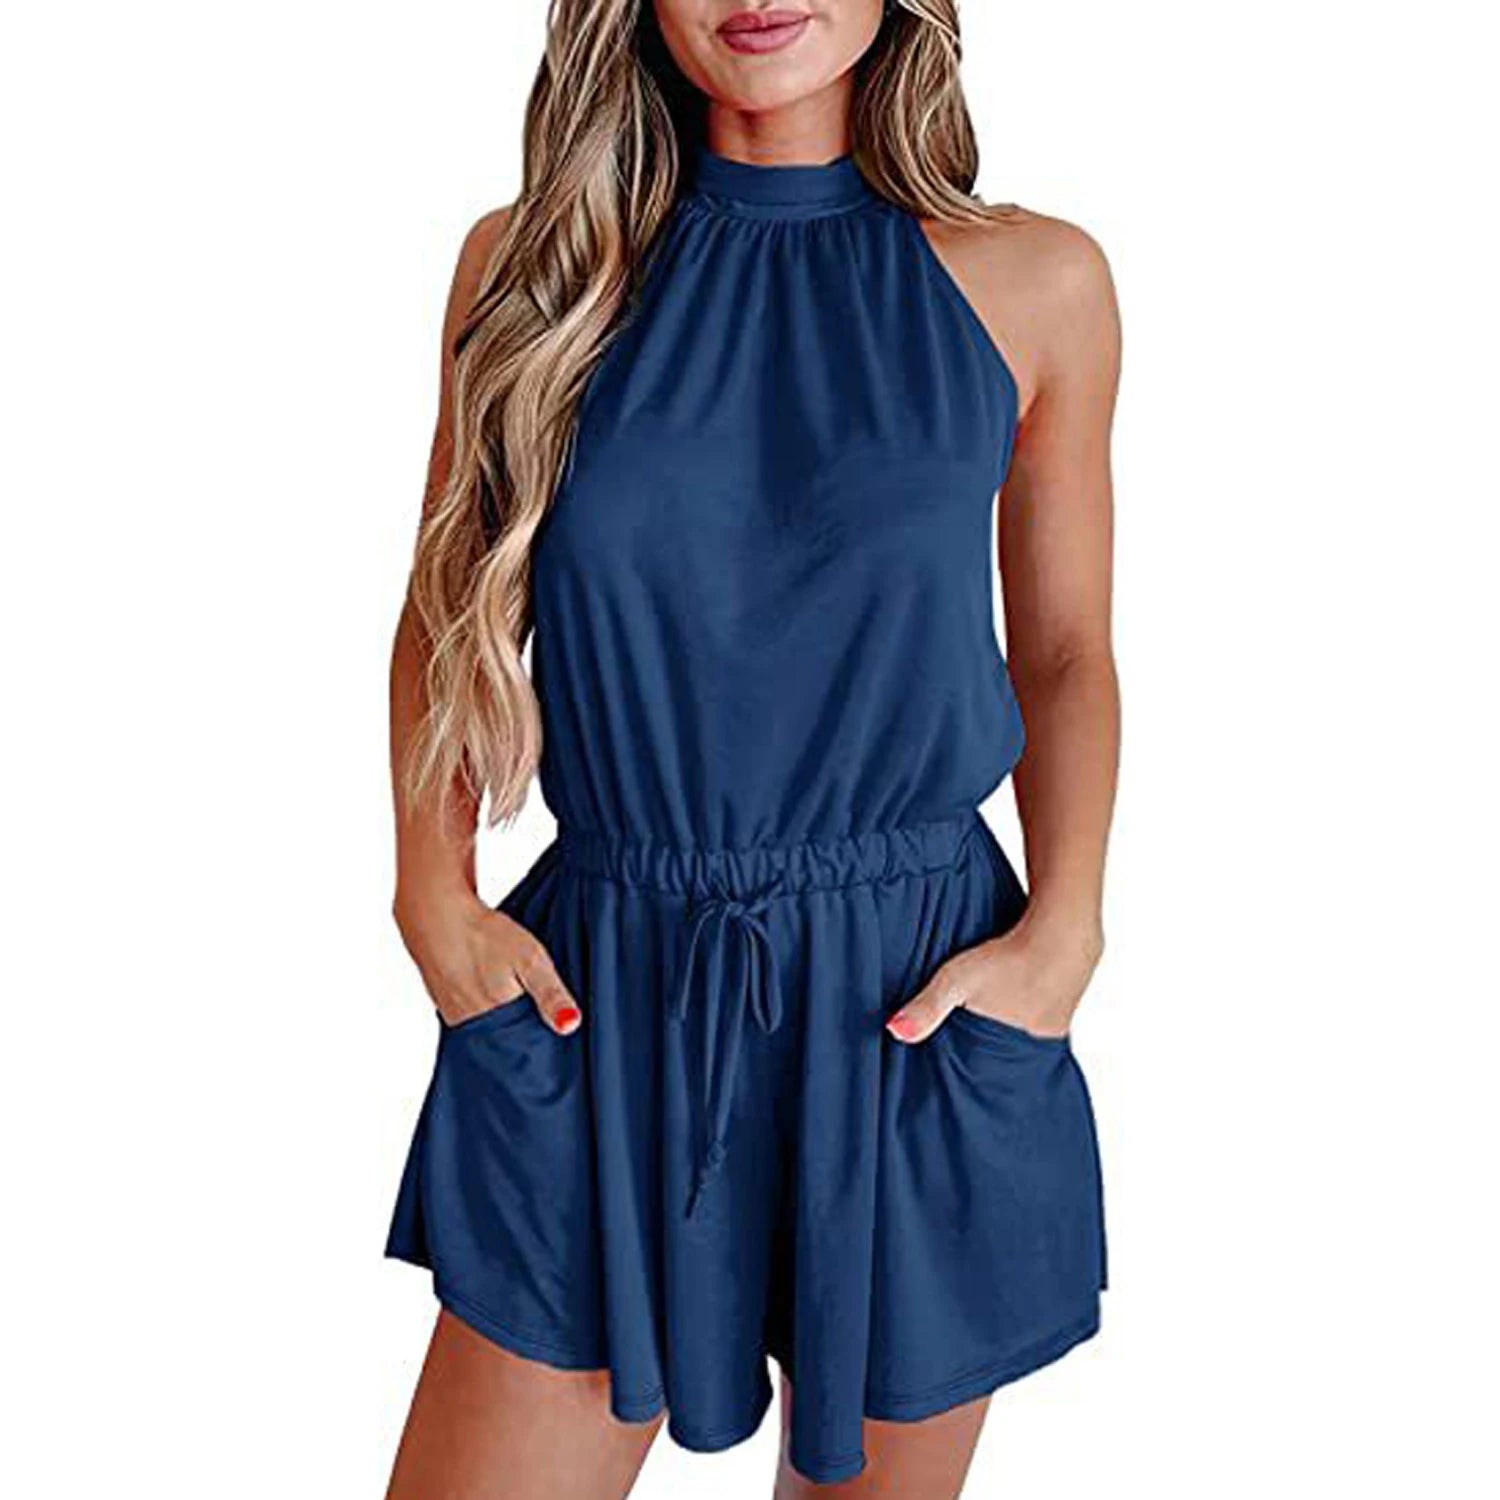 Rompers- Gathered-Waist Playsuit for Women - Solid Halter Romper- - Chuzko Women Clothing